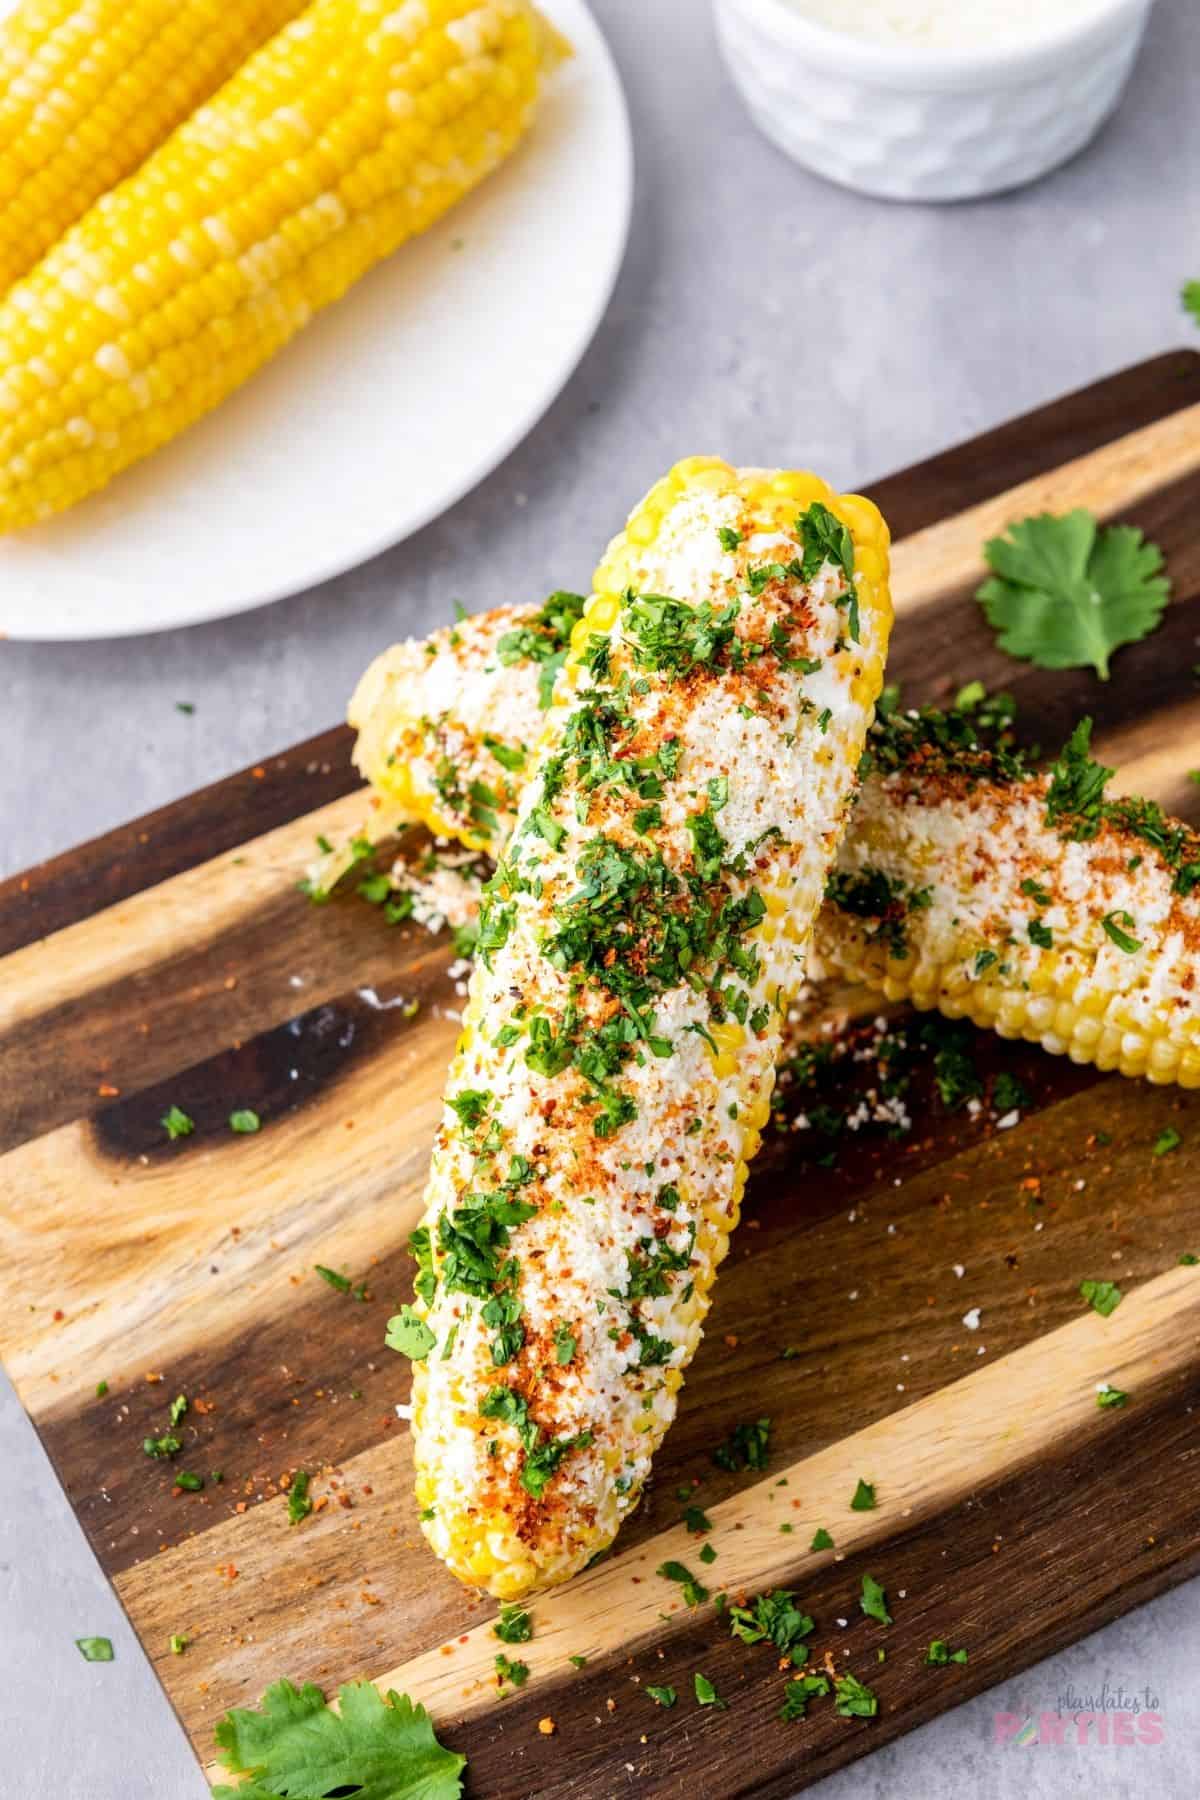 An ear of street corn is smothered with sauce then sprinkled with Cotija cheese, seasonings, and herbs.